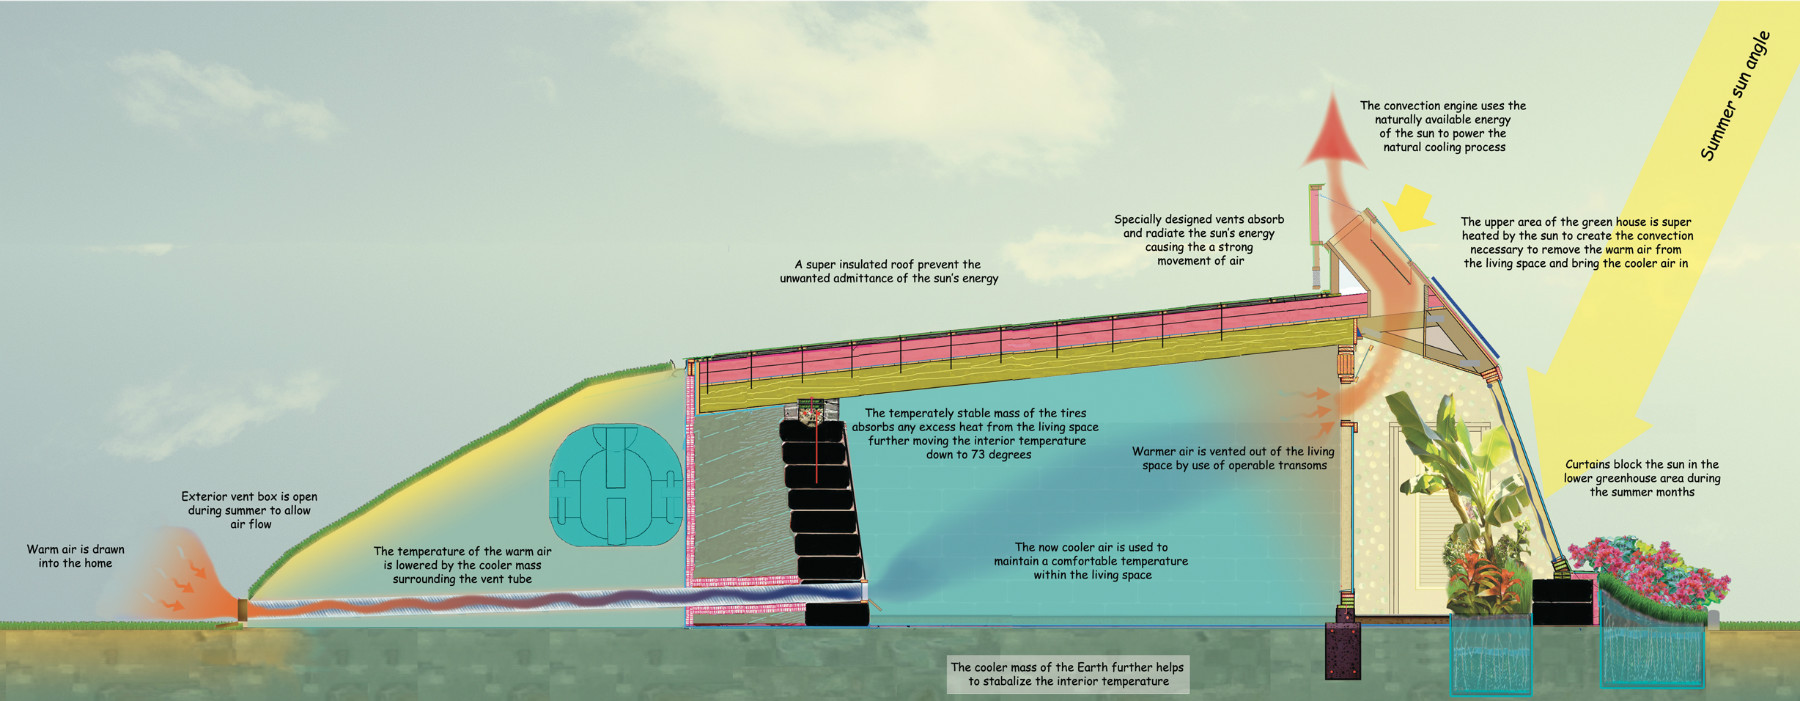 Earthship by Michael Reynolds:
                            The ventilation scheme of air circulation
                            (ventilation circuit) with air duct at the
                            bottom from the back and duct above the
                            front